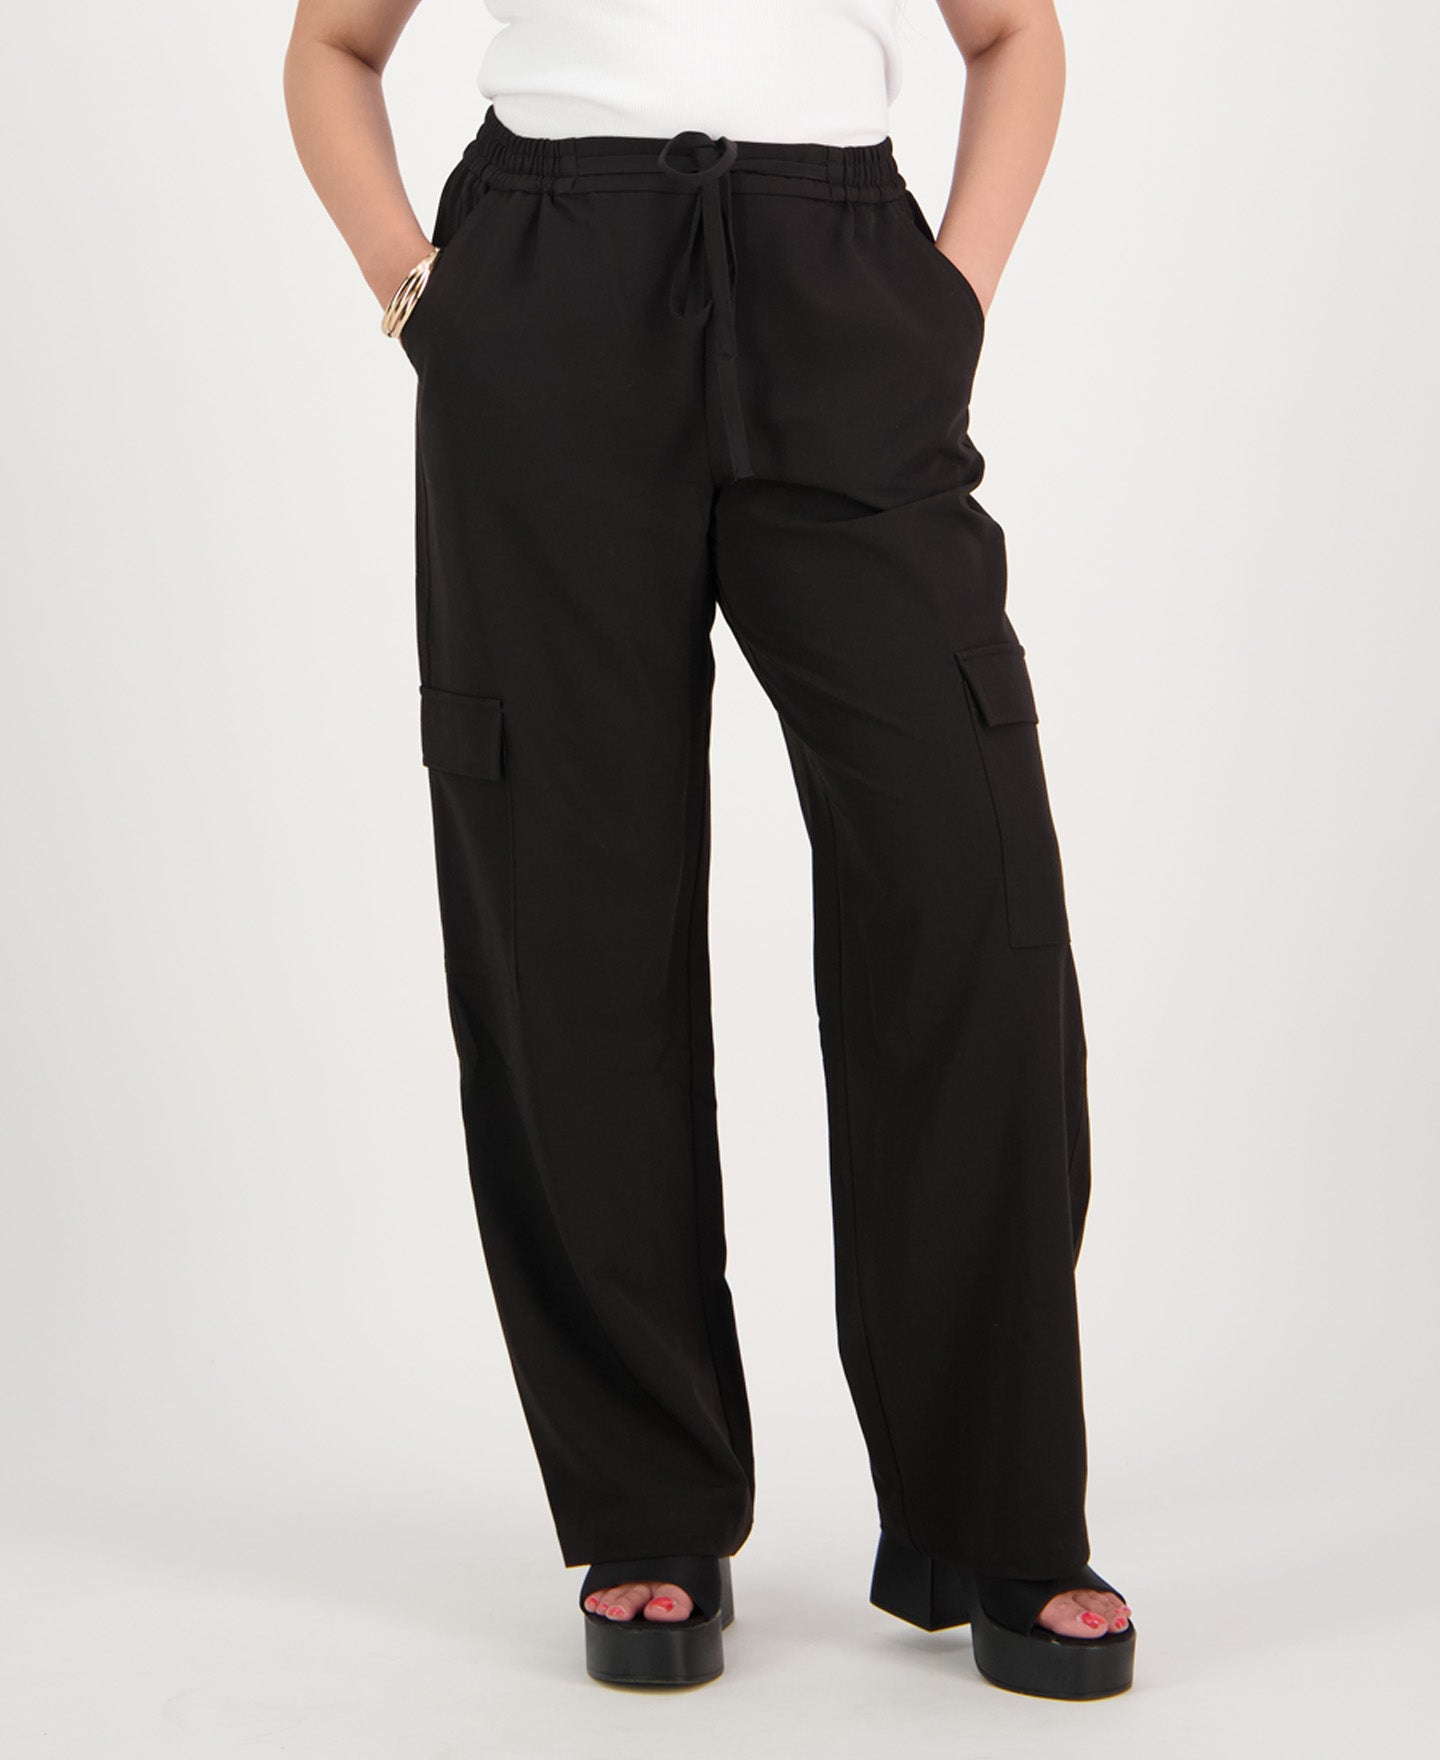 New Look tapered pleat front pants in stone | ASOS